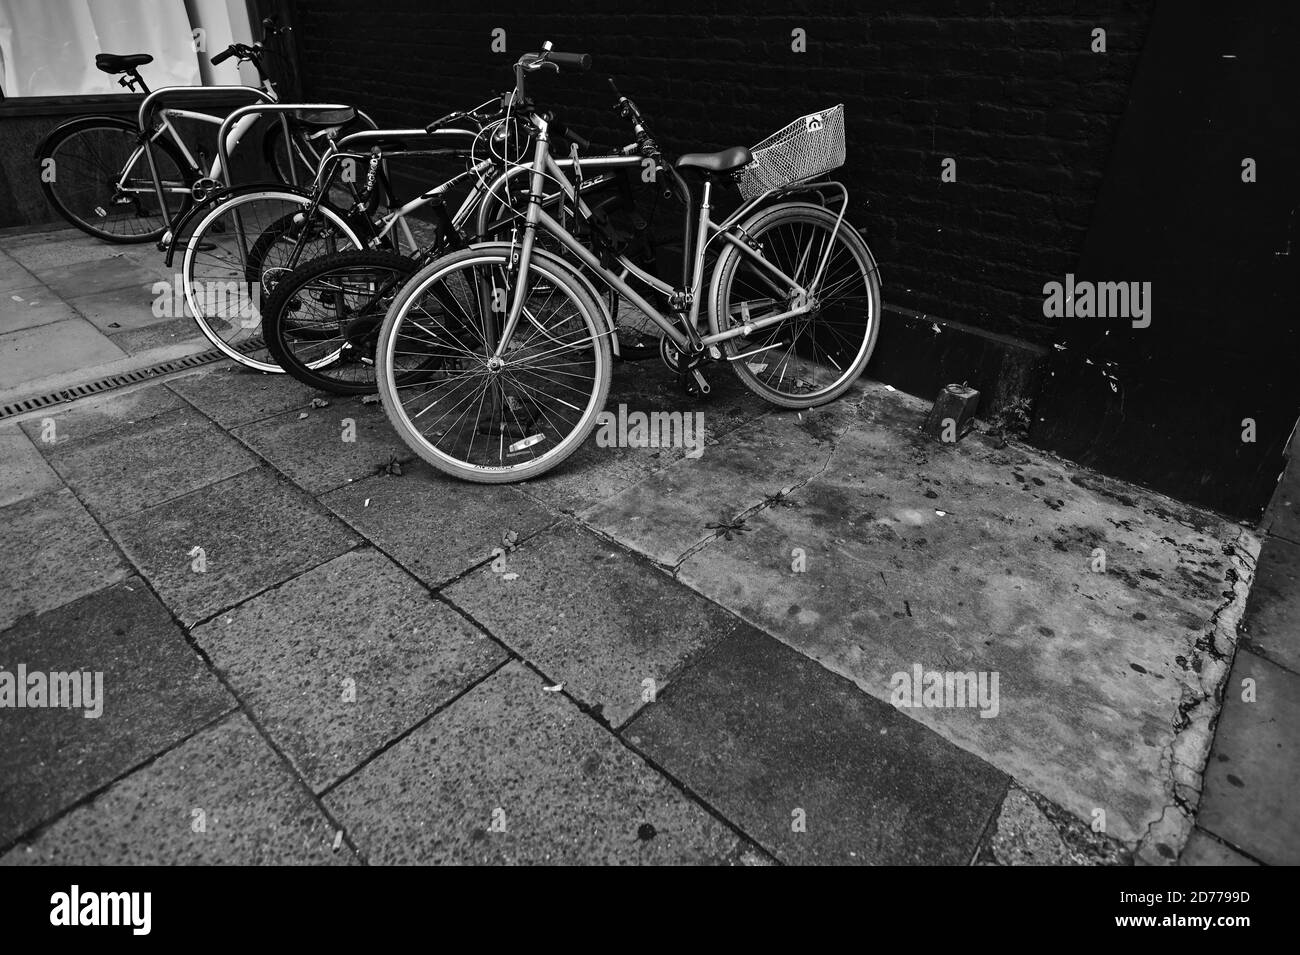 Old black cycle Black and White Stock Photos & Images - Alamy